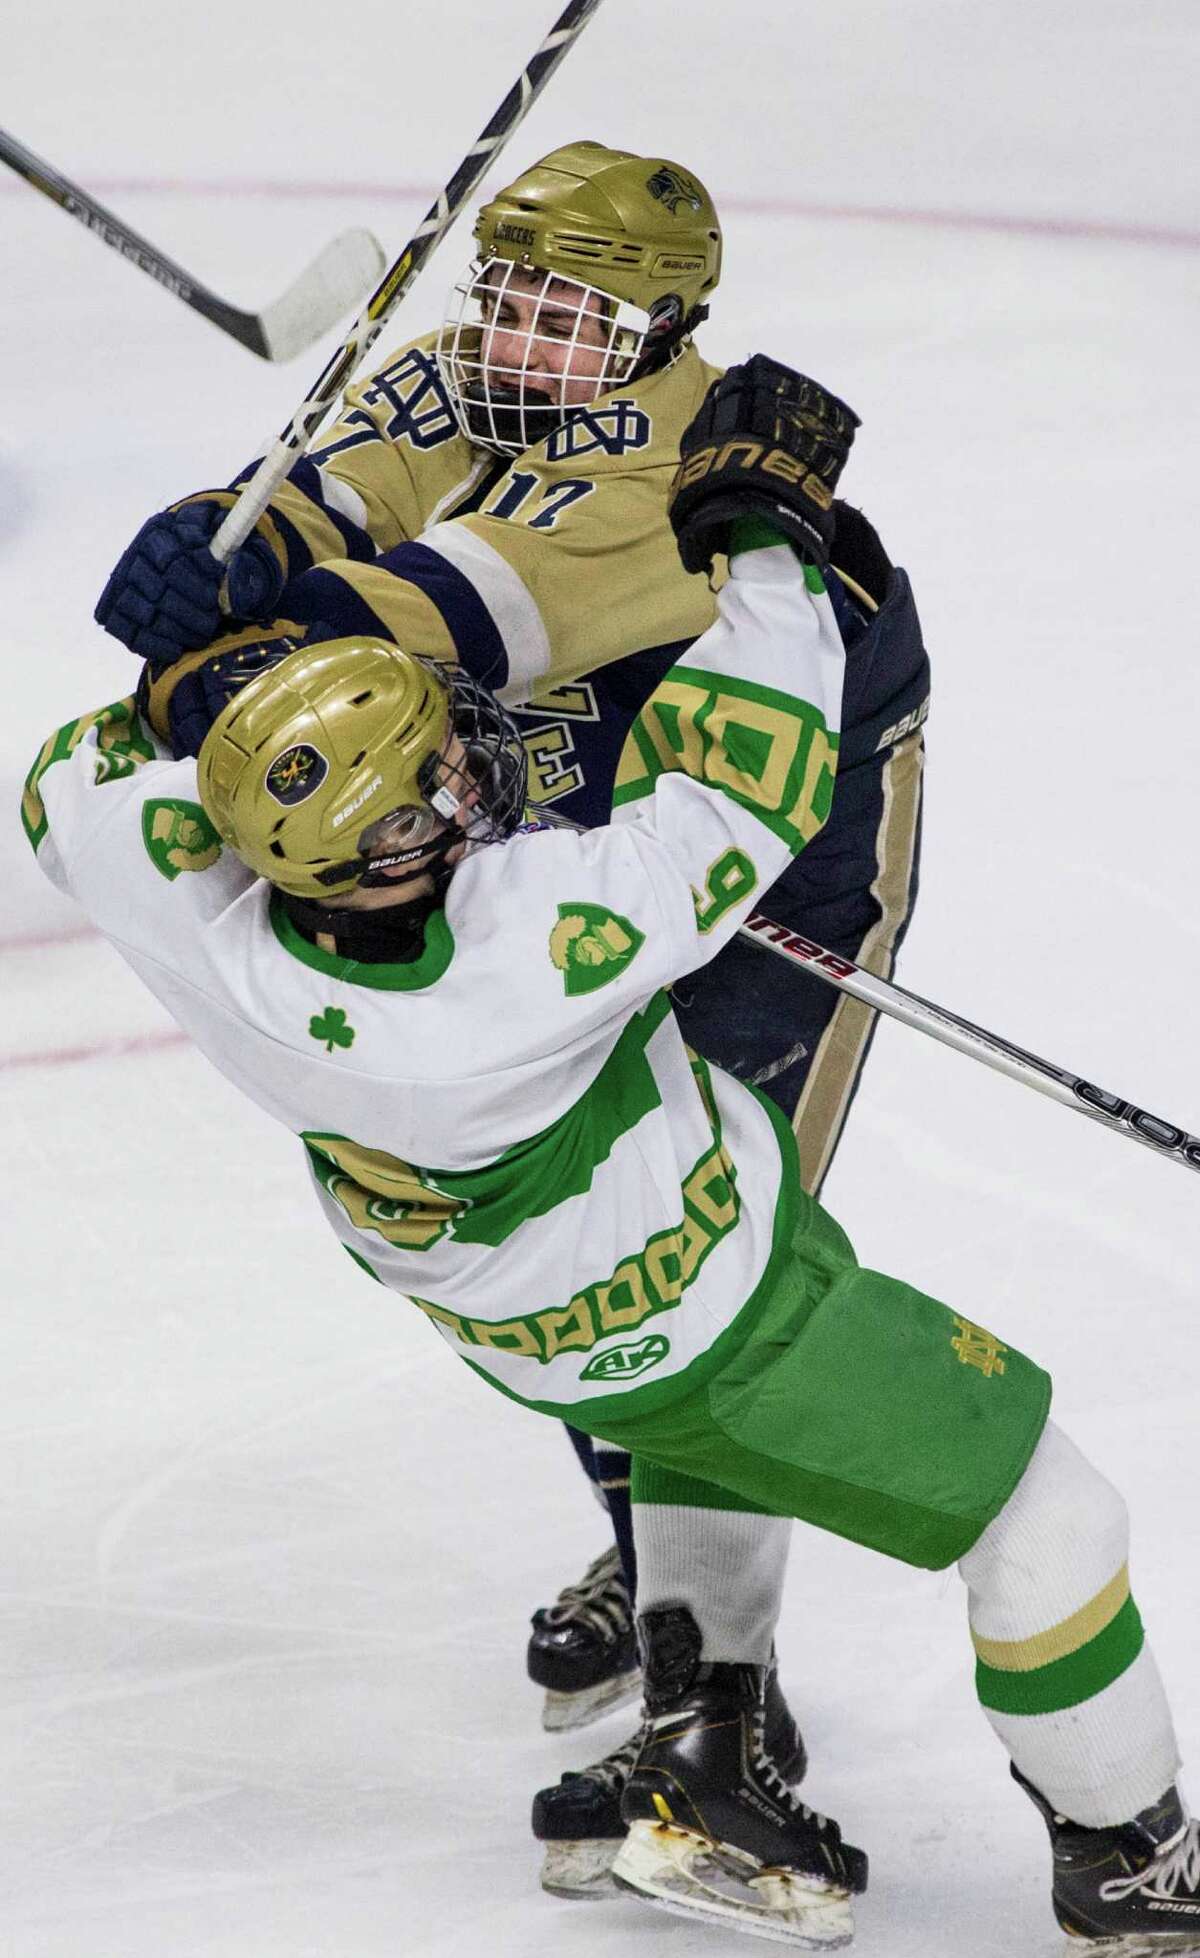 Notre Dame-Fairfield?’s Michael Antoniou knocks down Notre Dame-West Haven?’s Calvin Hoban in front of the Notre Dame-Fairfield goal during a quarterfinal round game of the CIAC division 1 boys ice hockey tournament played at Webster Bank Arena, Bridgeport, CT on Saturday, March 12, 2016